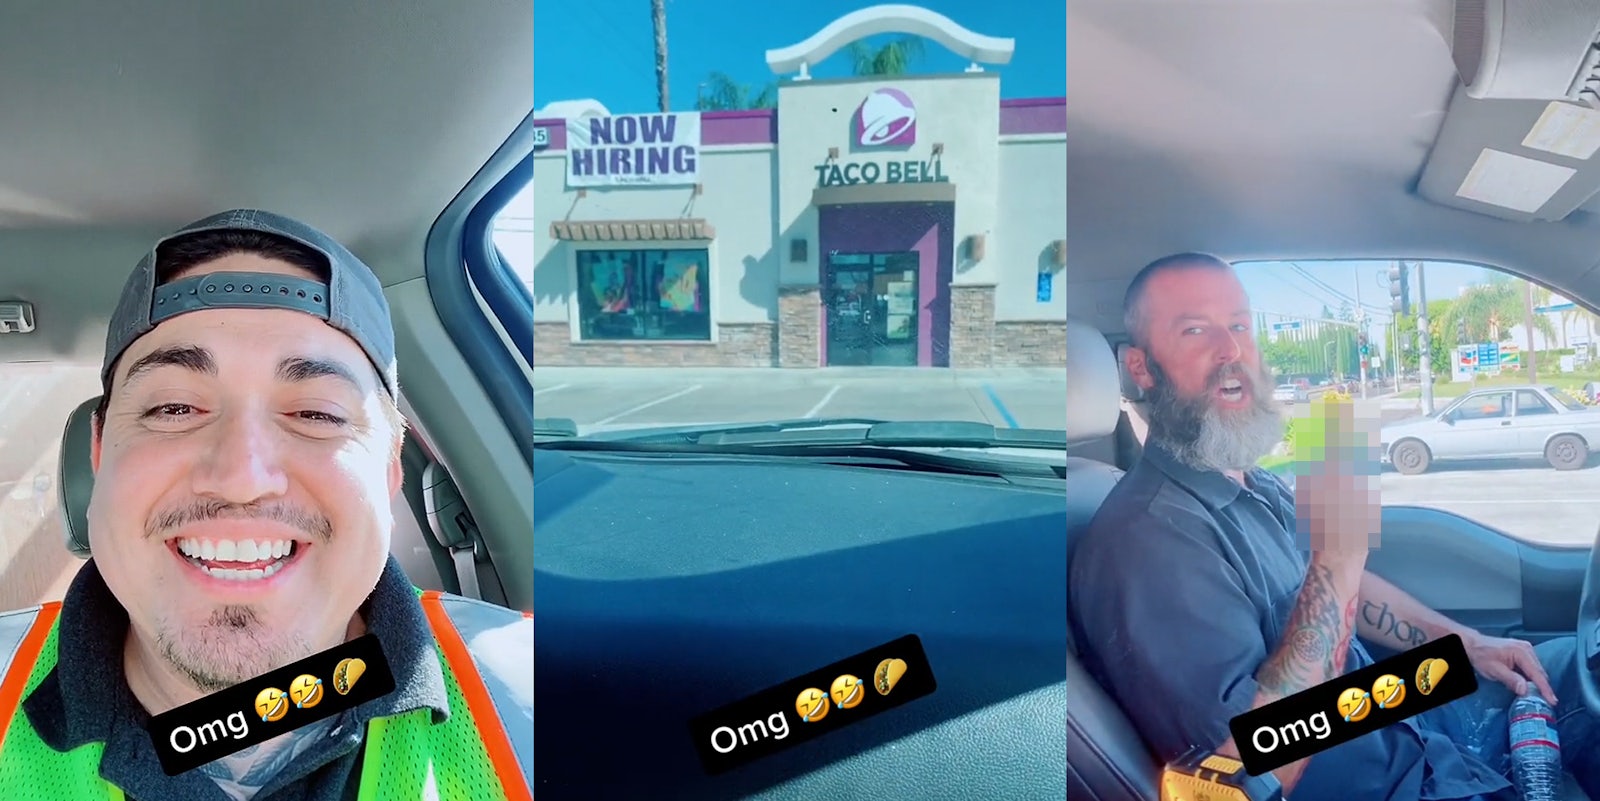 man in car laughing caption 'Omg' (l) Taco Bell restaurant seen from inside car caption 'Omg' (c) man in car with middle finger up censored caption 'Omg' (r)